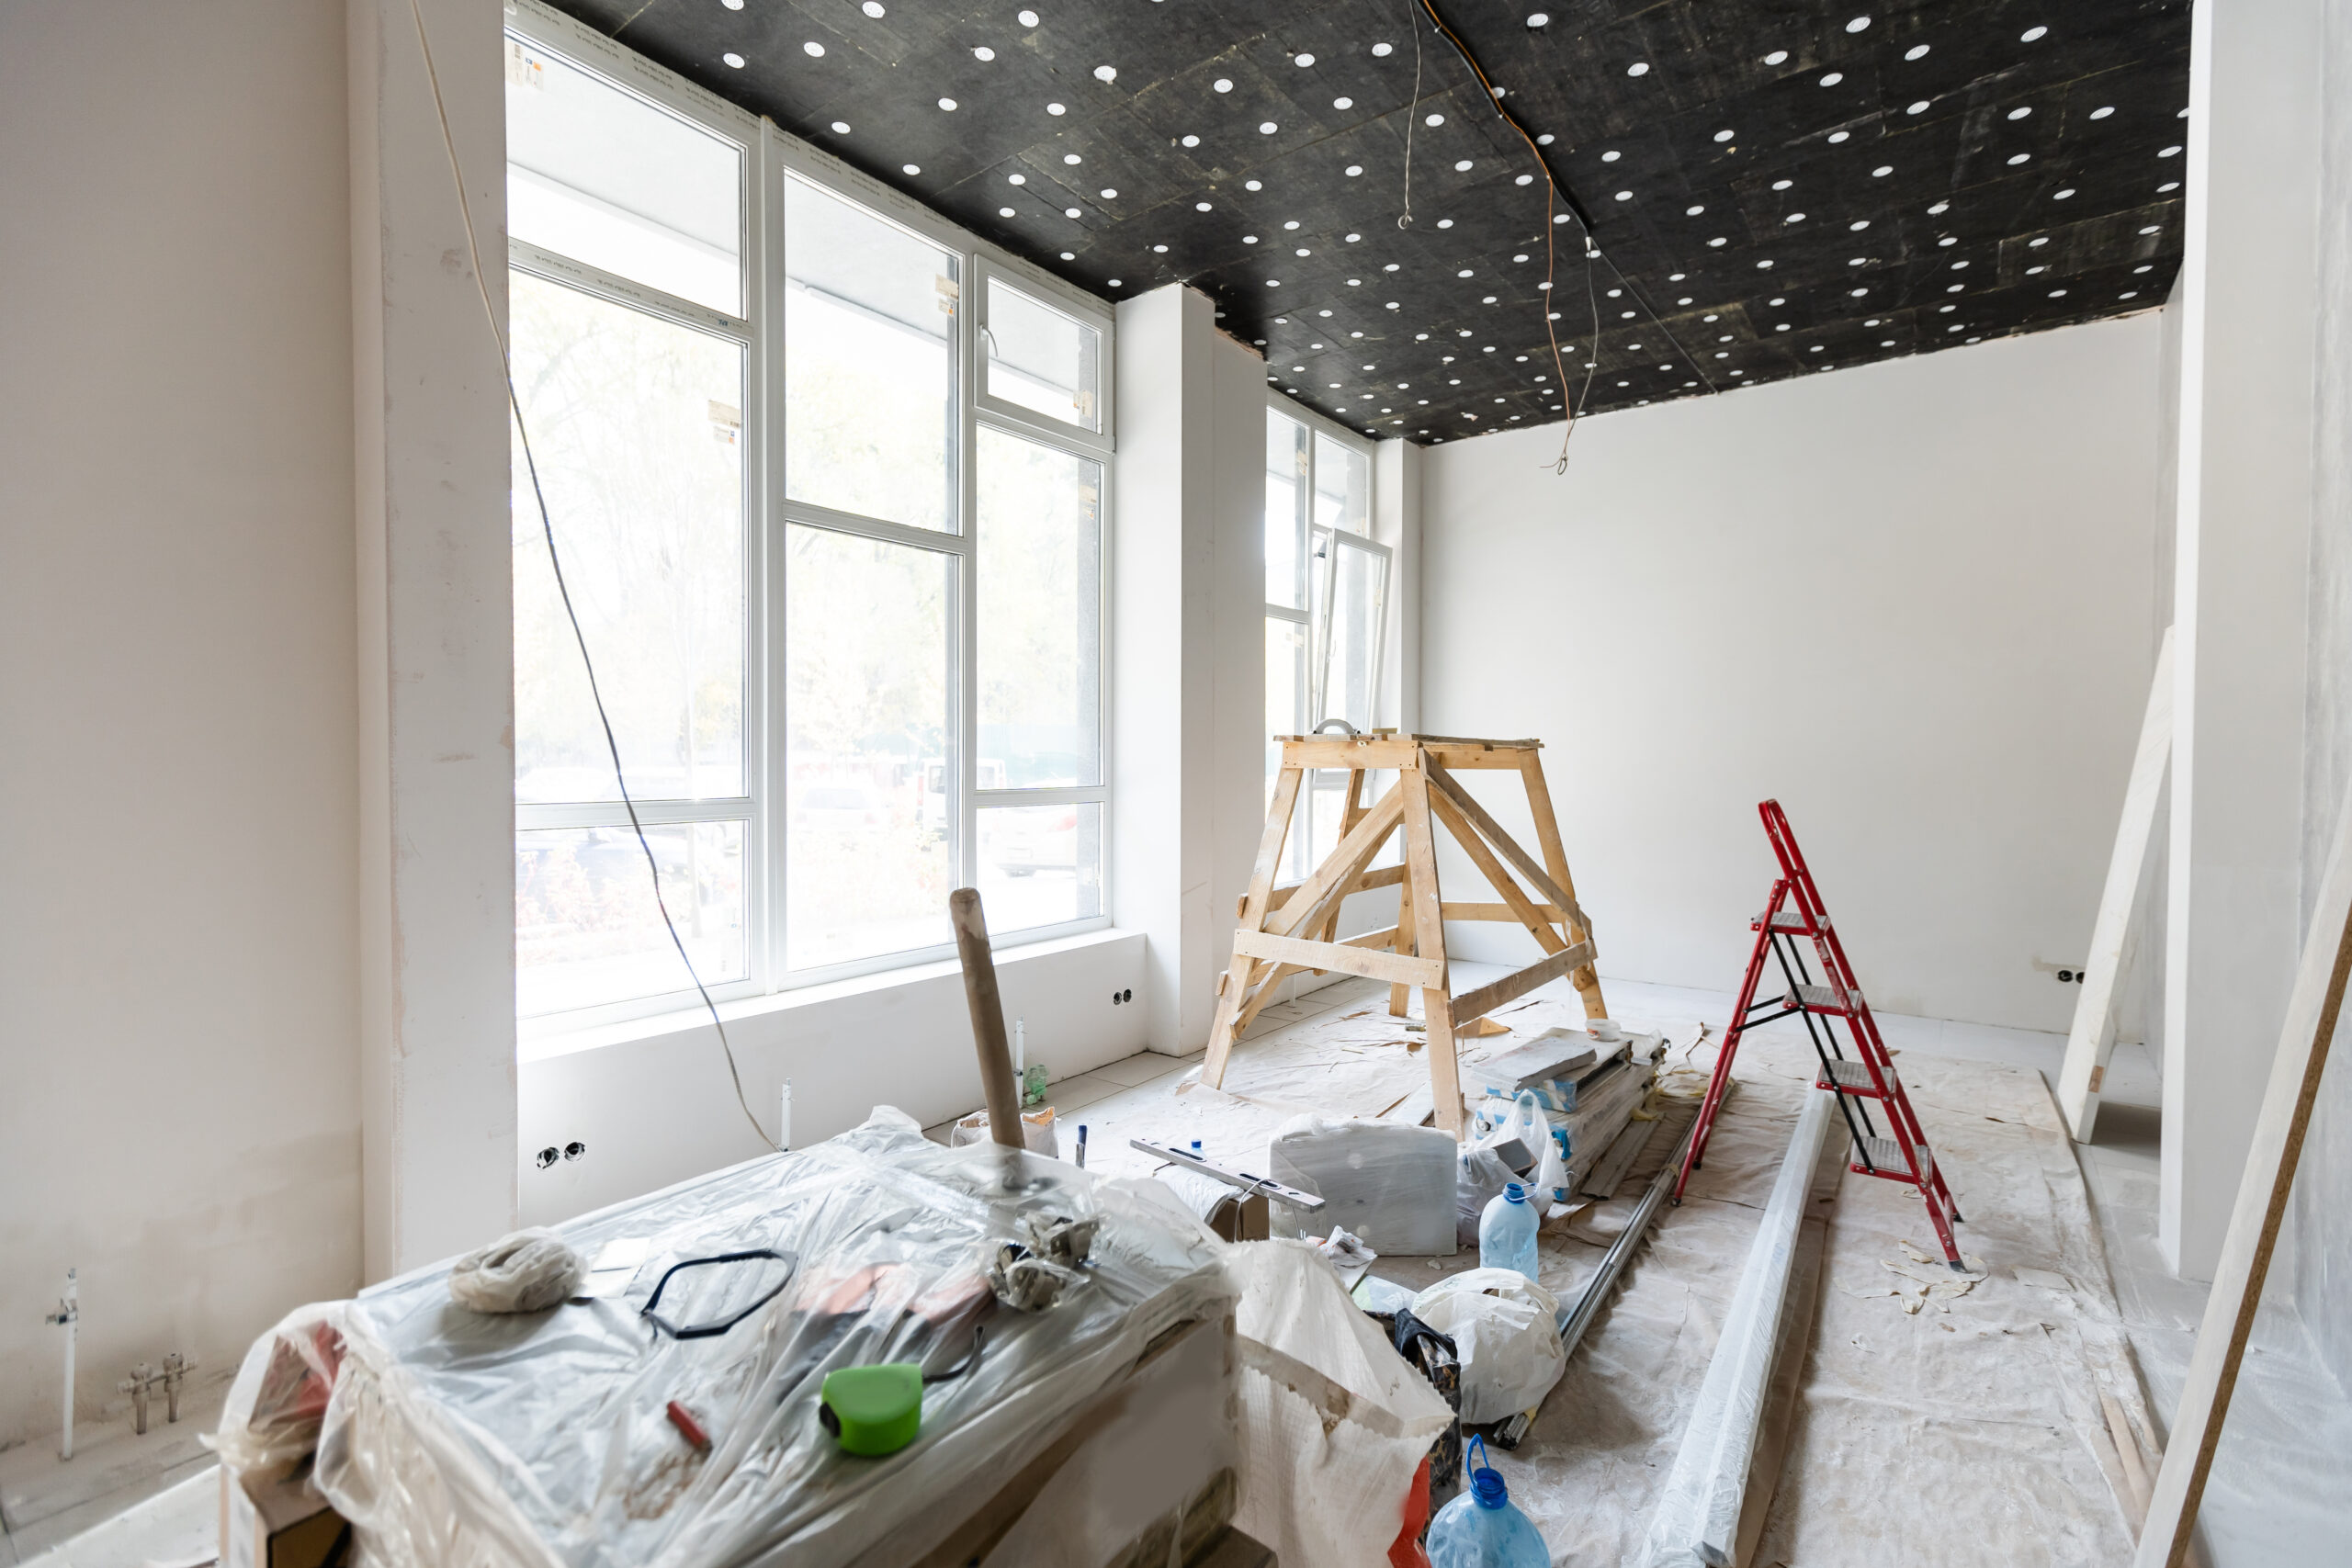 Why choose drywall repair and installation service?